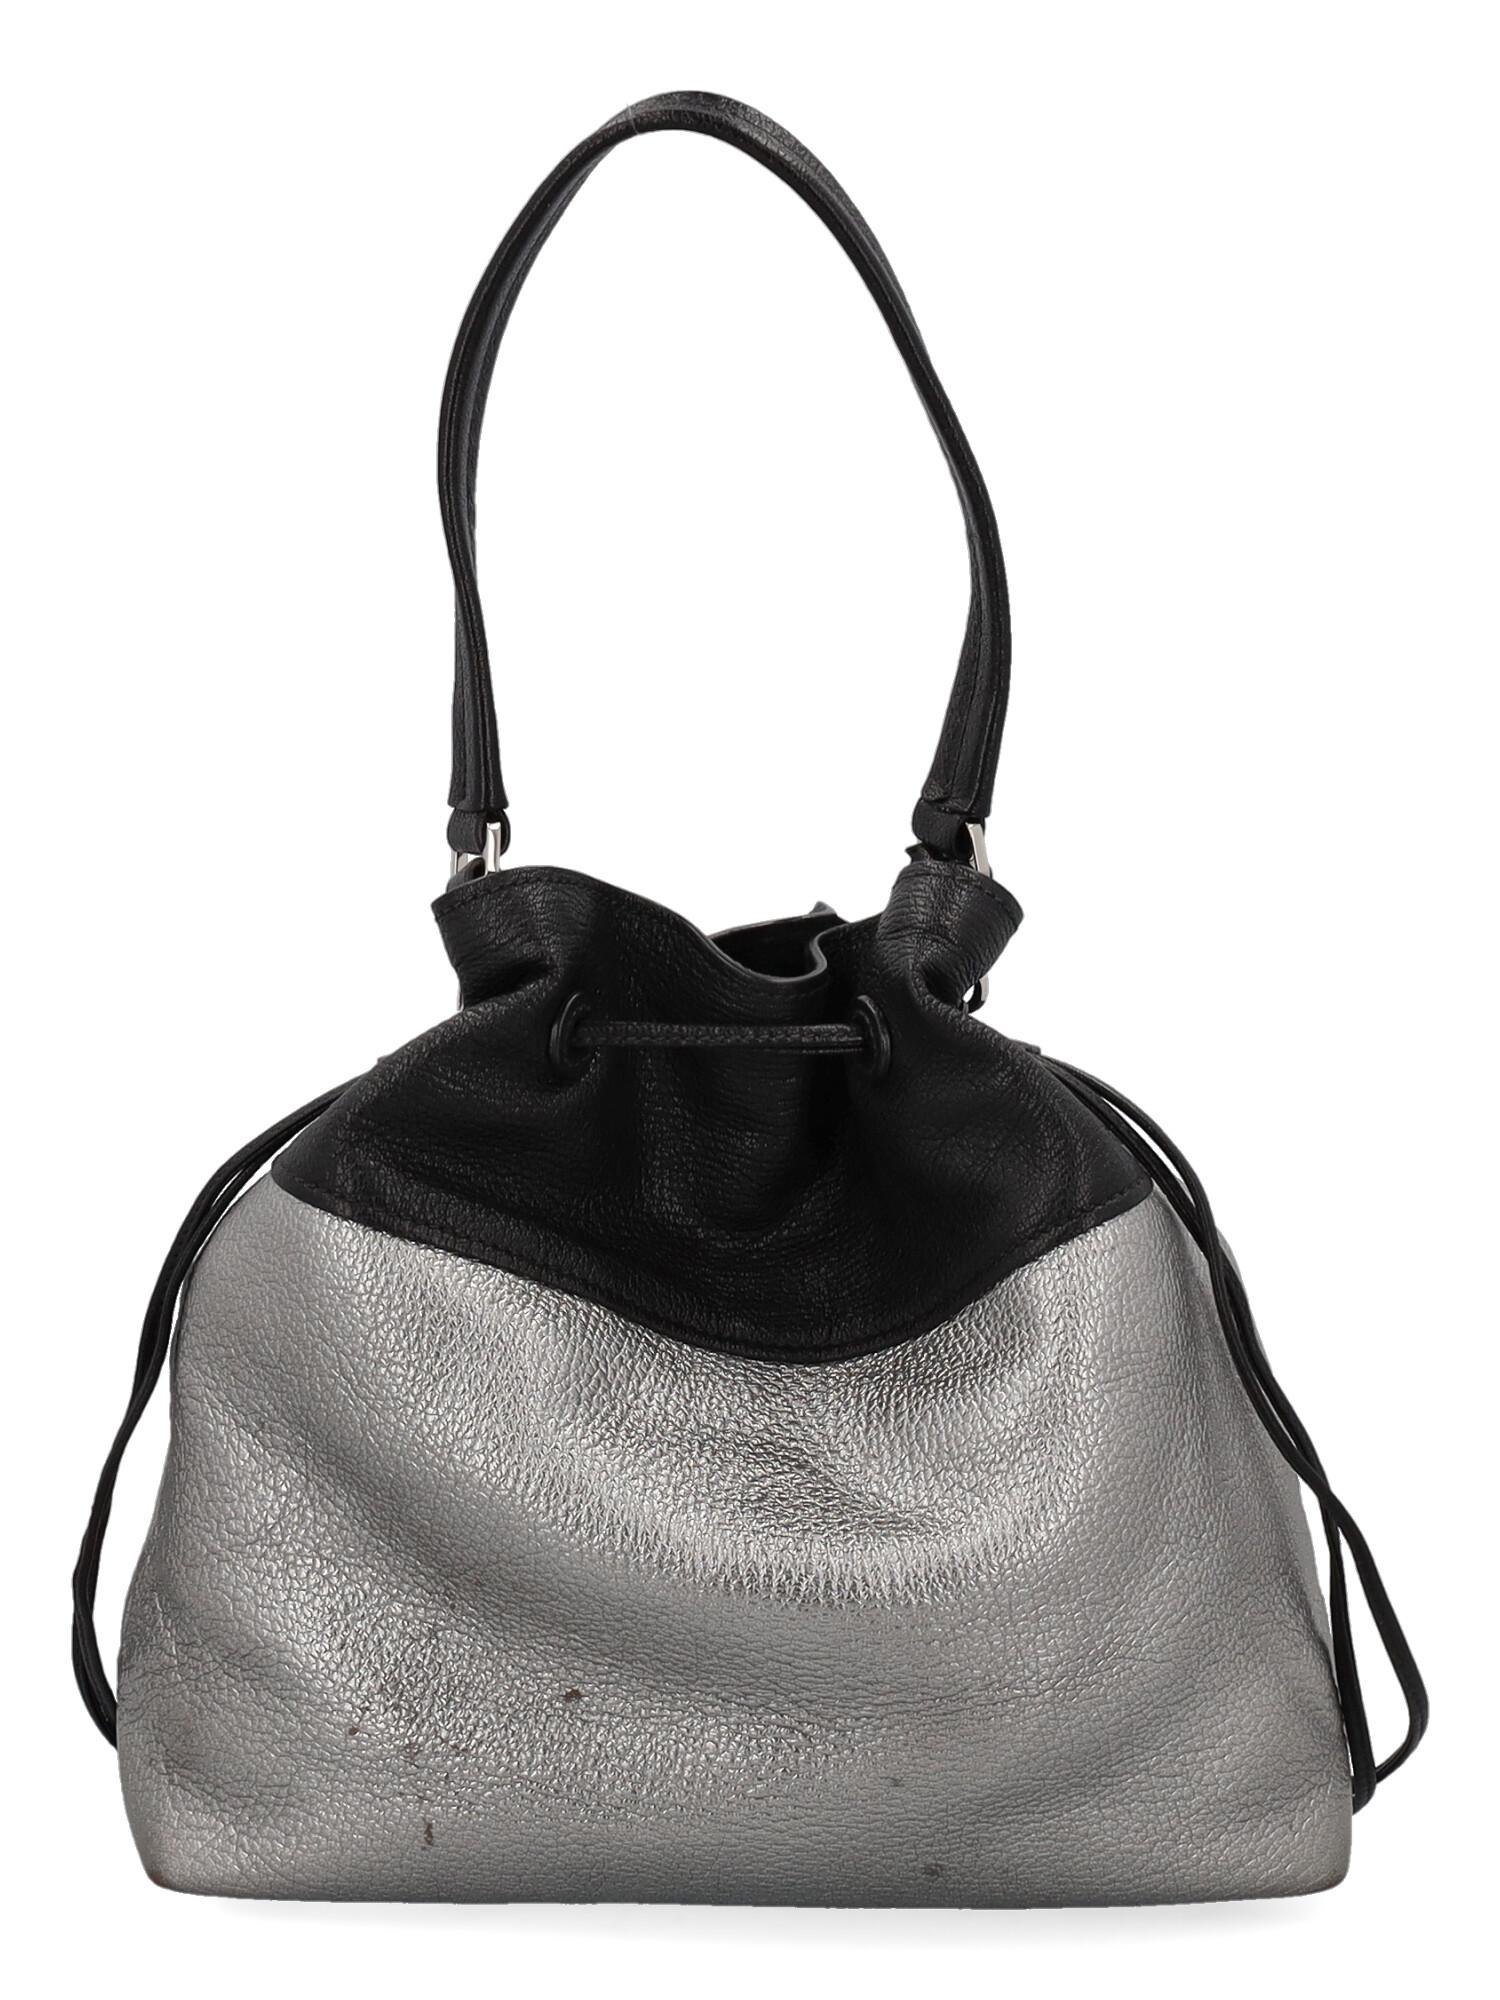 Miu Miu Women Shoulder bags Black, Silver Leather  In Fair Condition For Sale In Milan, IT